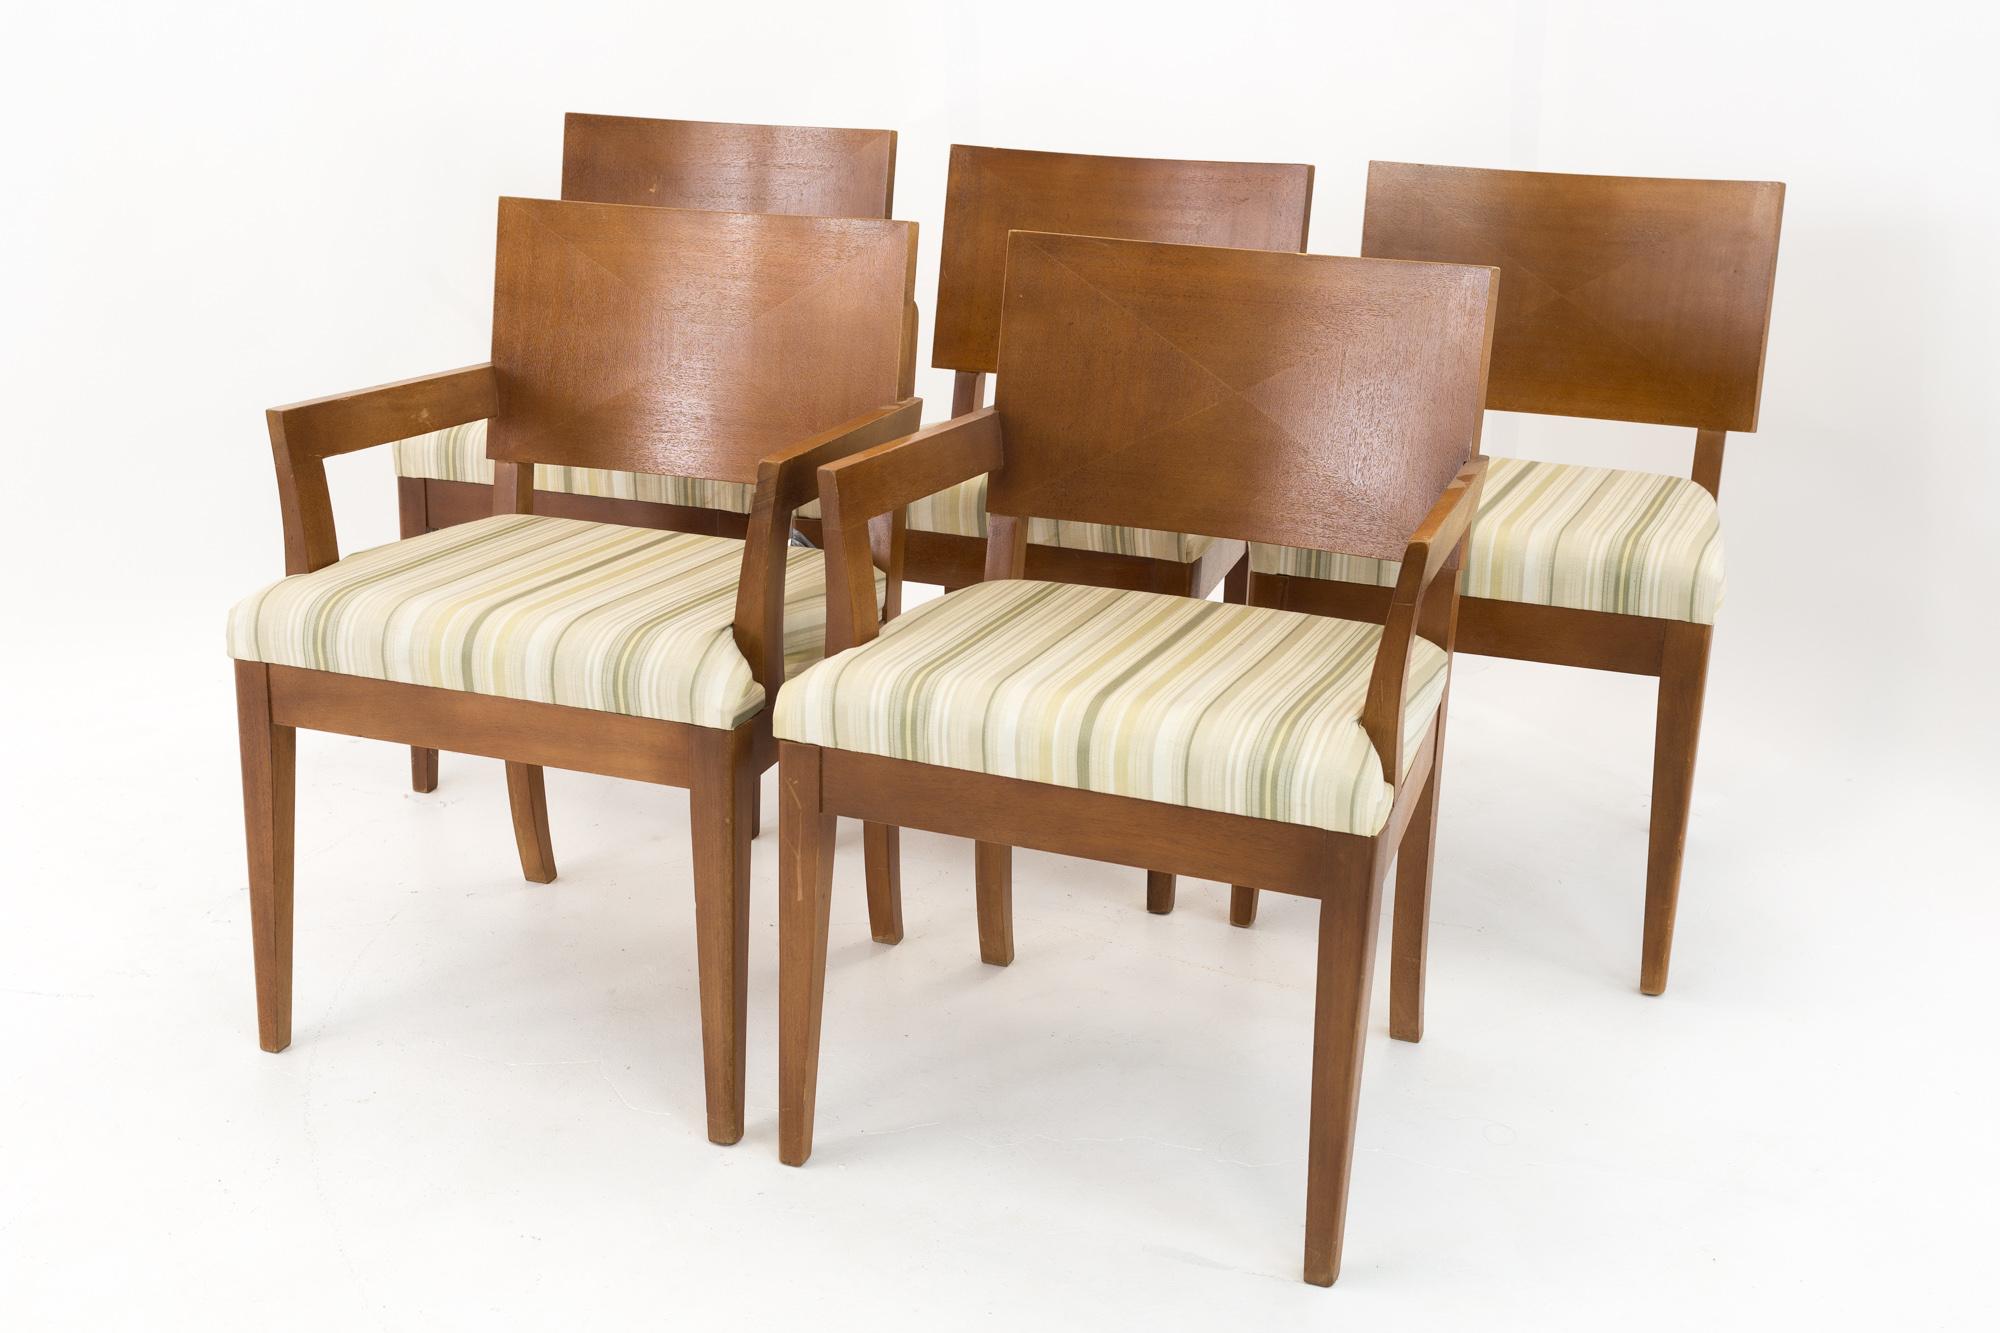 Paul Laszlo style Stewartstown furniture mid century dining chairs - set of 5
Each chair measures 20 wide x 20.75 deep x 31.5 inches high with an arm height of 25.5 inches and a seat height of 19.25 inches

All pieces of furniture can be had in